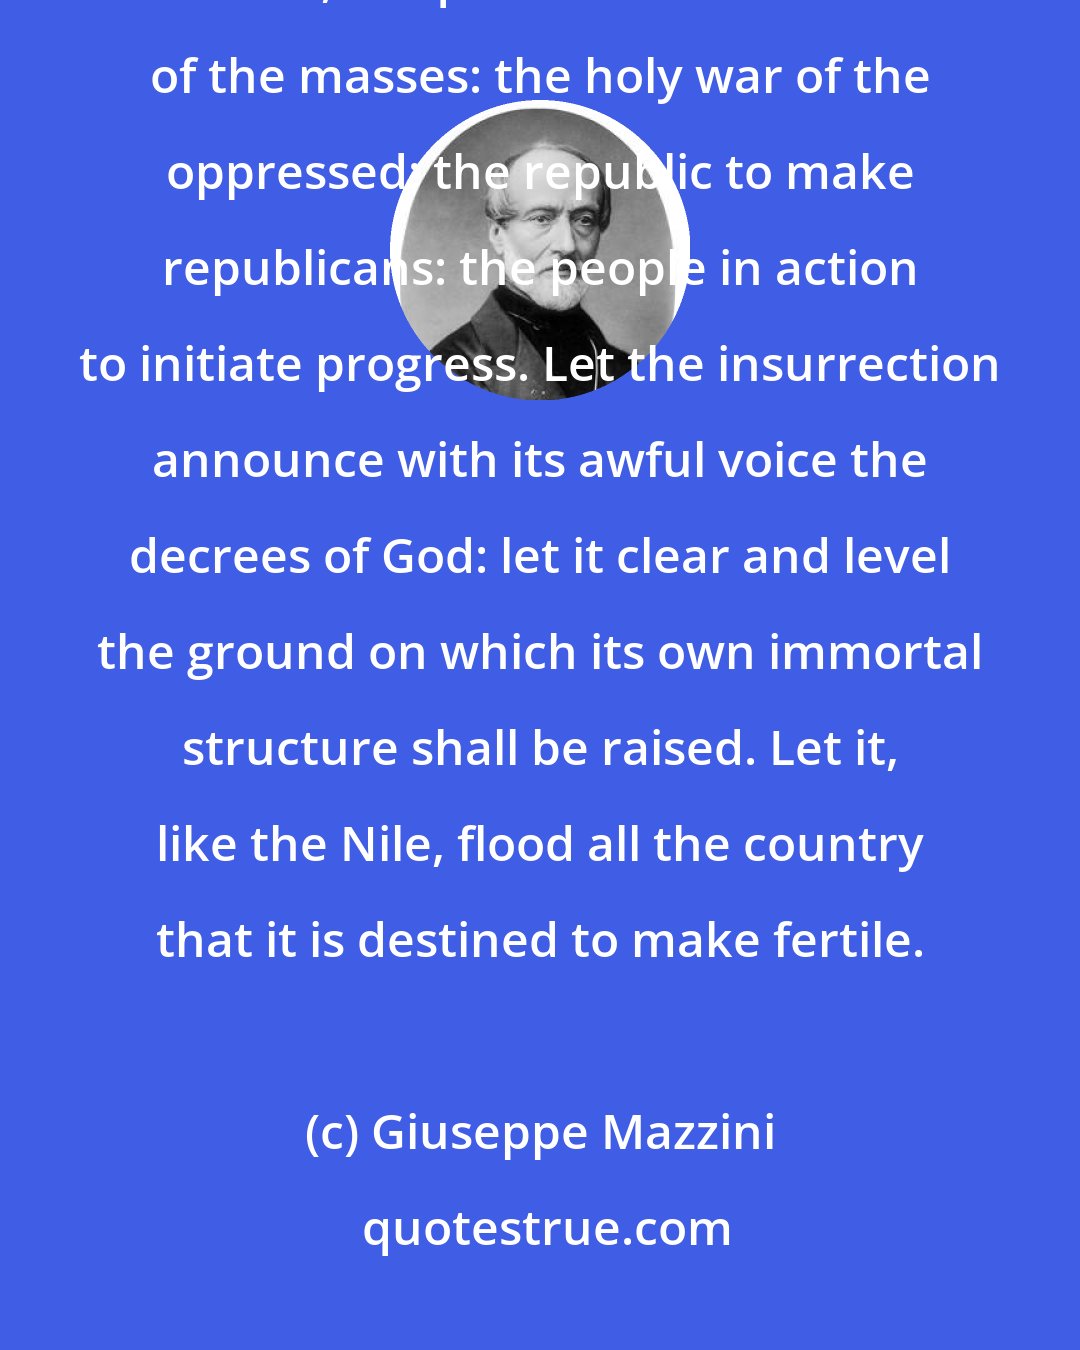 Giuseppe Mazzini: Insurrection: Insurrection as soon as circumstances allow: insurrection, strenuous, ubiquitous: the insurrection of the masses: the holy war of the oppressed: the republic to make republicans: the people in action to initiate progress. Let the insurrection announce with its awful voice the decrees of God: let it clear and level the ground on which its own immortal structure shall be raised. Let it, like the Nile, flood all the country that it is destined to make fertile.